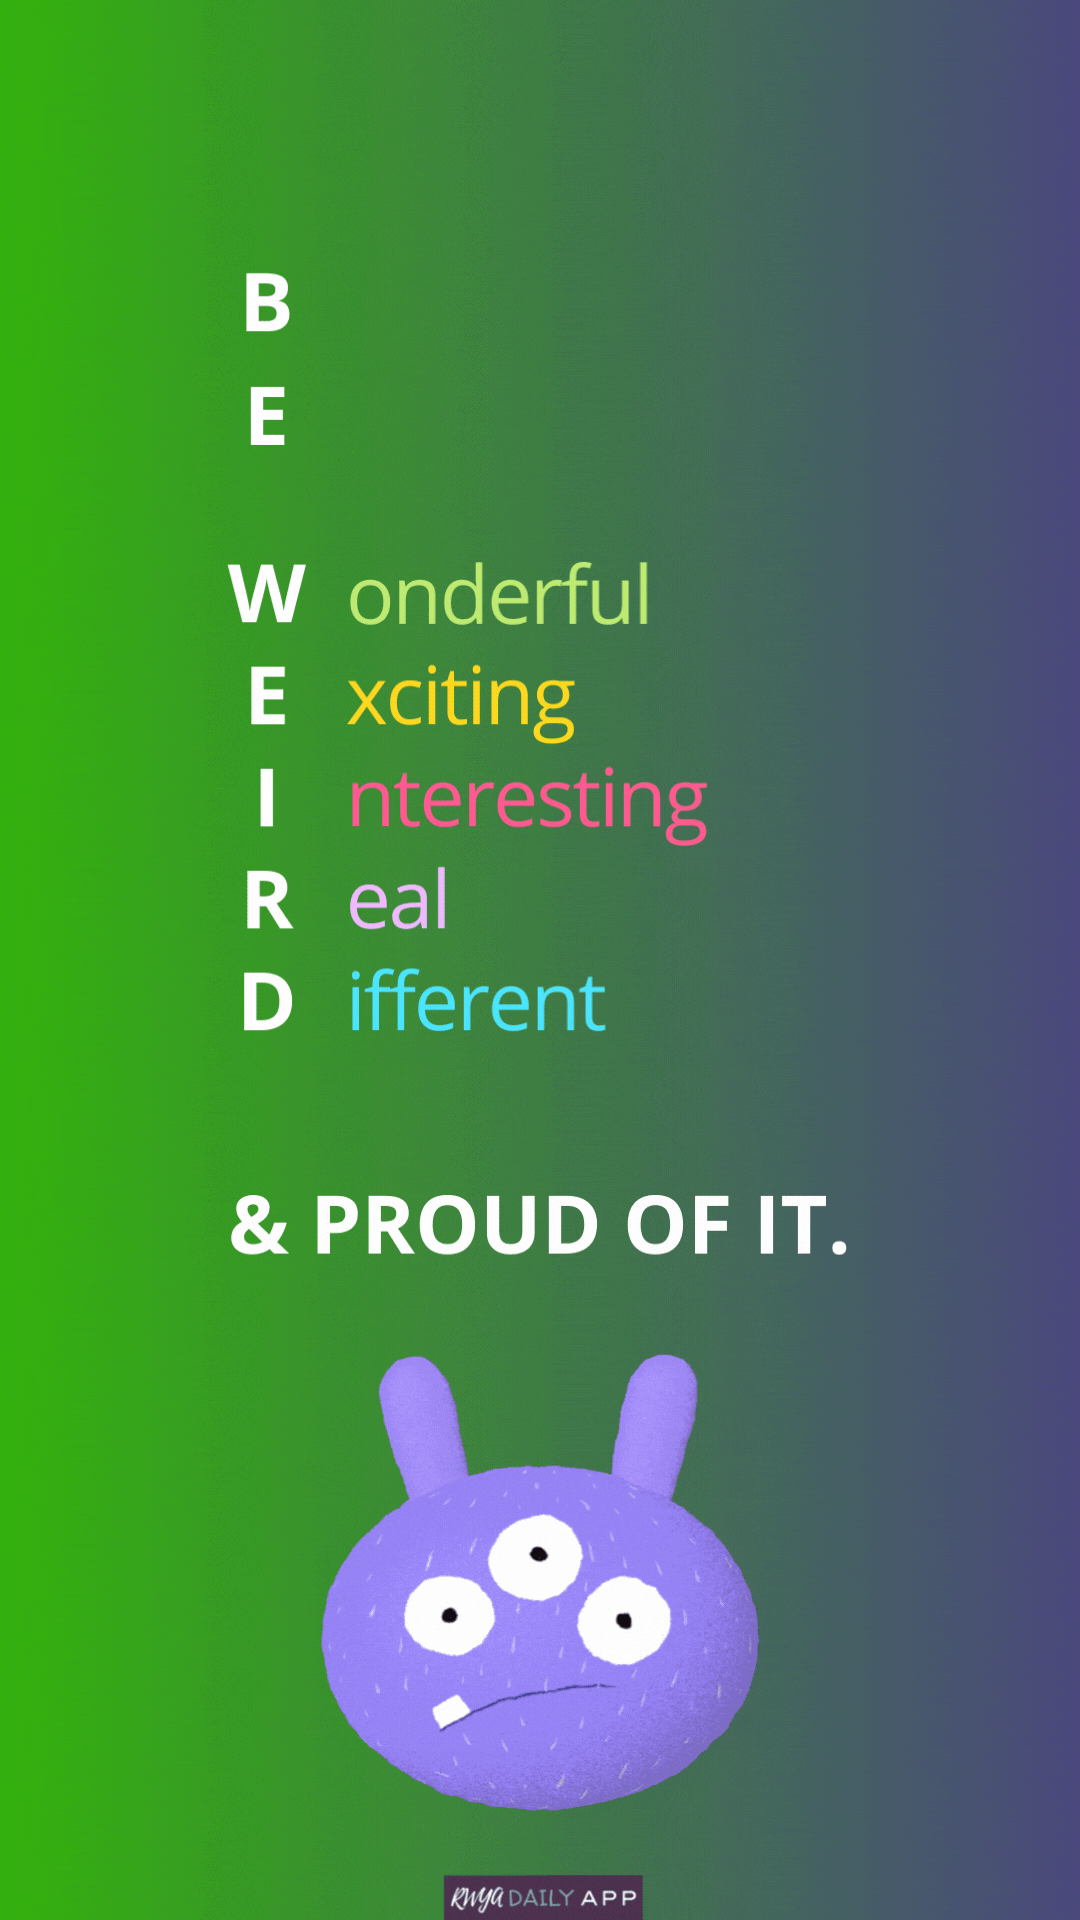 Be weird - Wonderful, Exciting, Interesting, Real, Different & Proud of it.